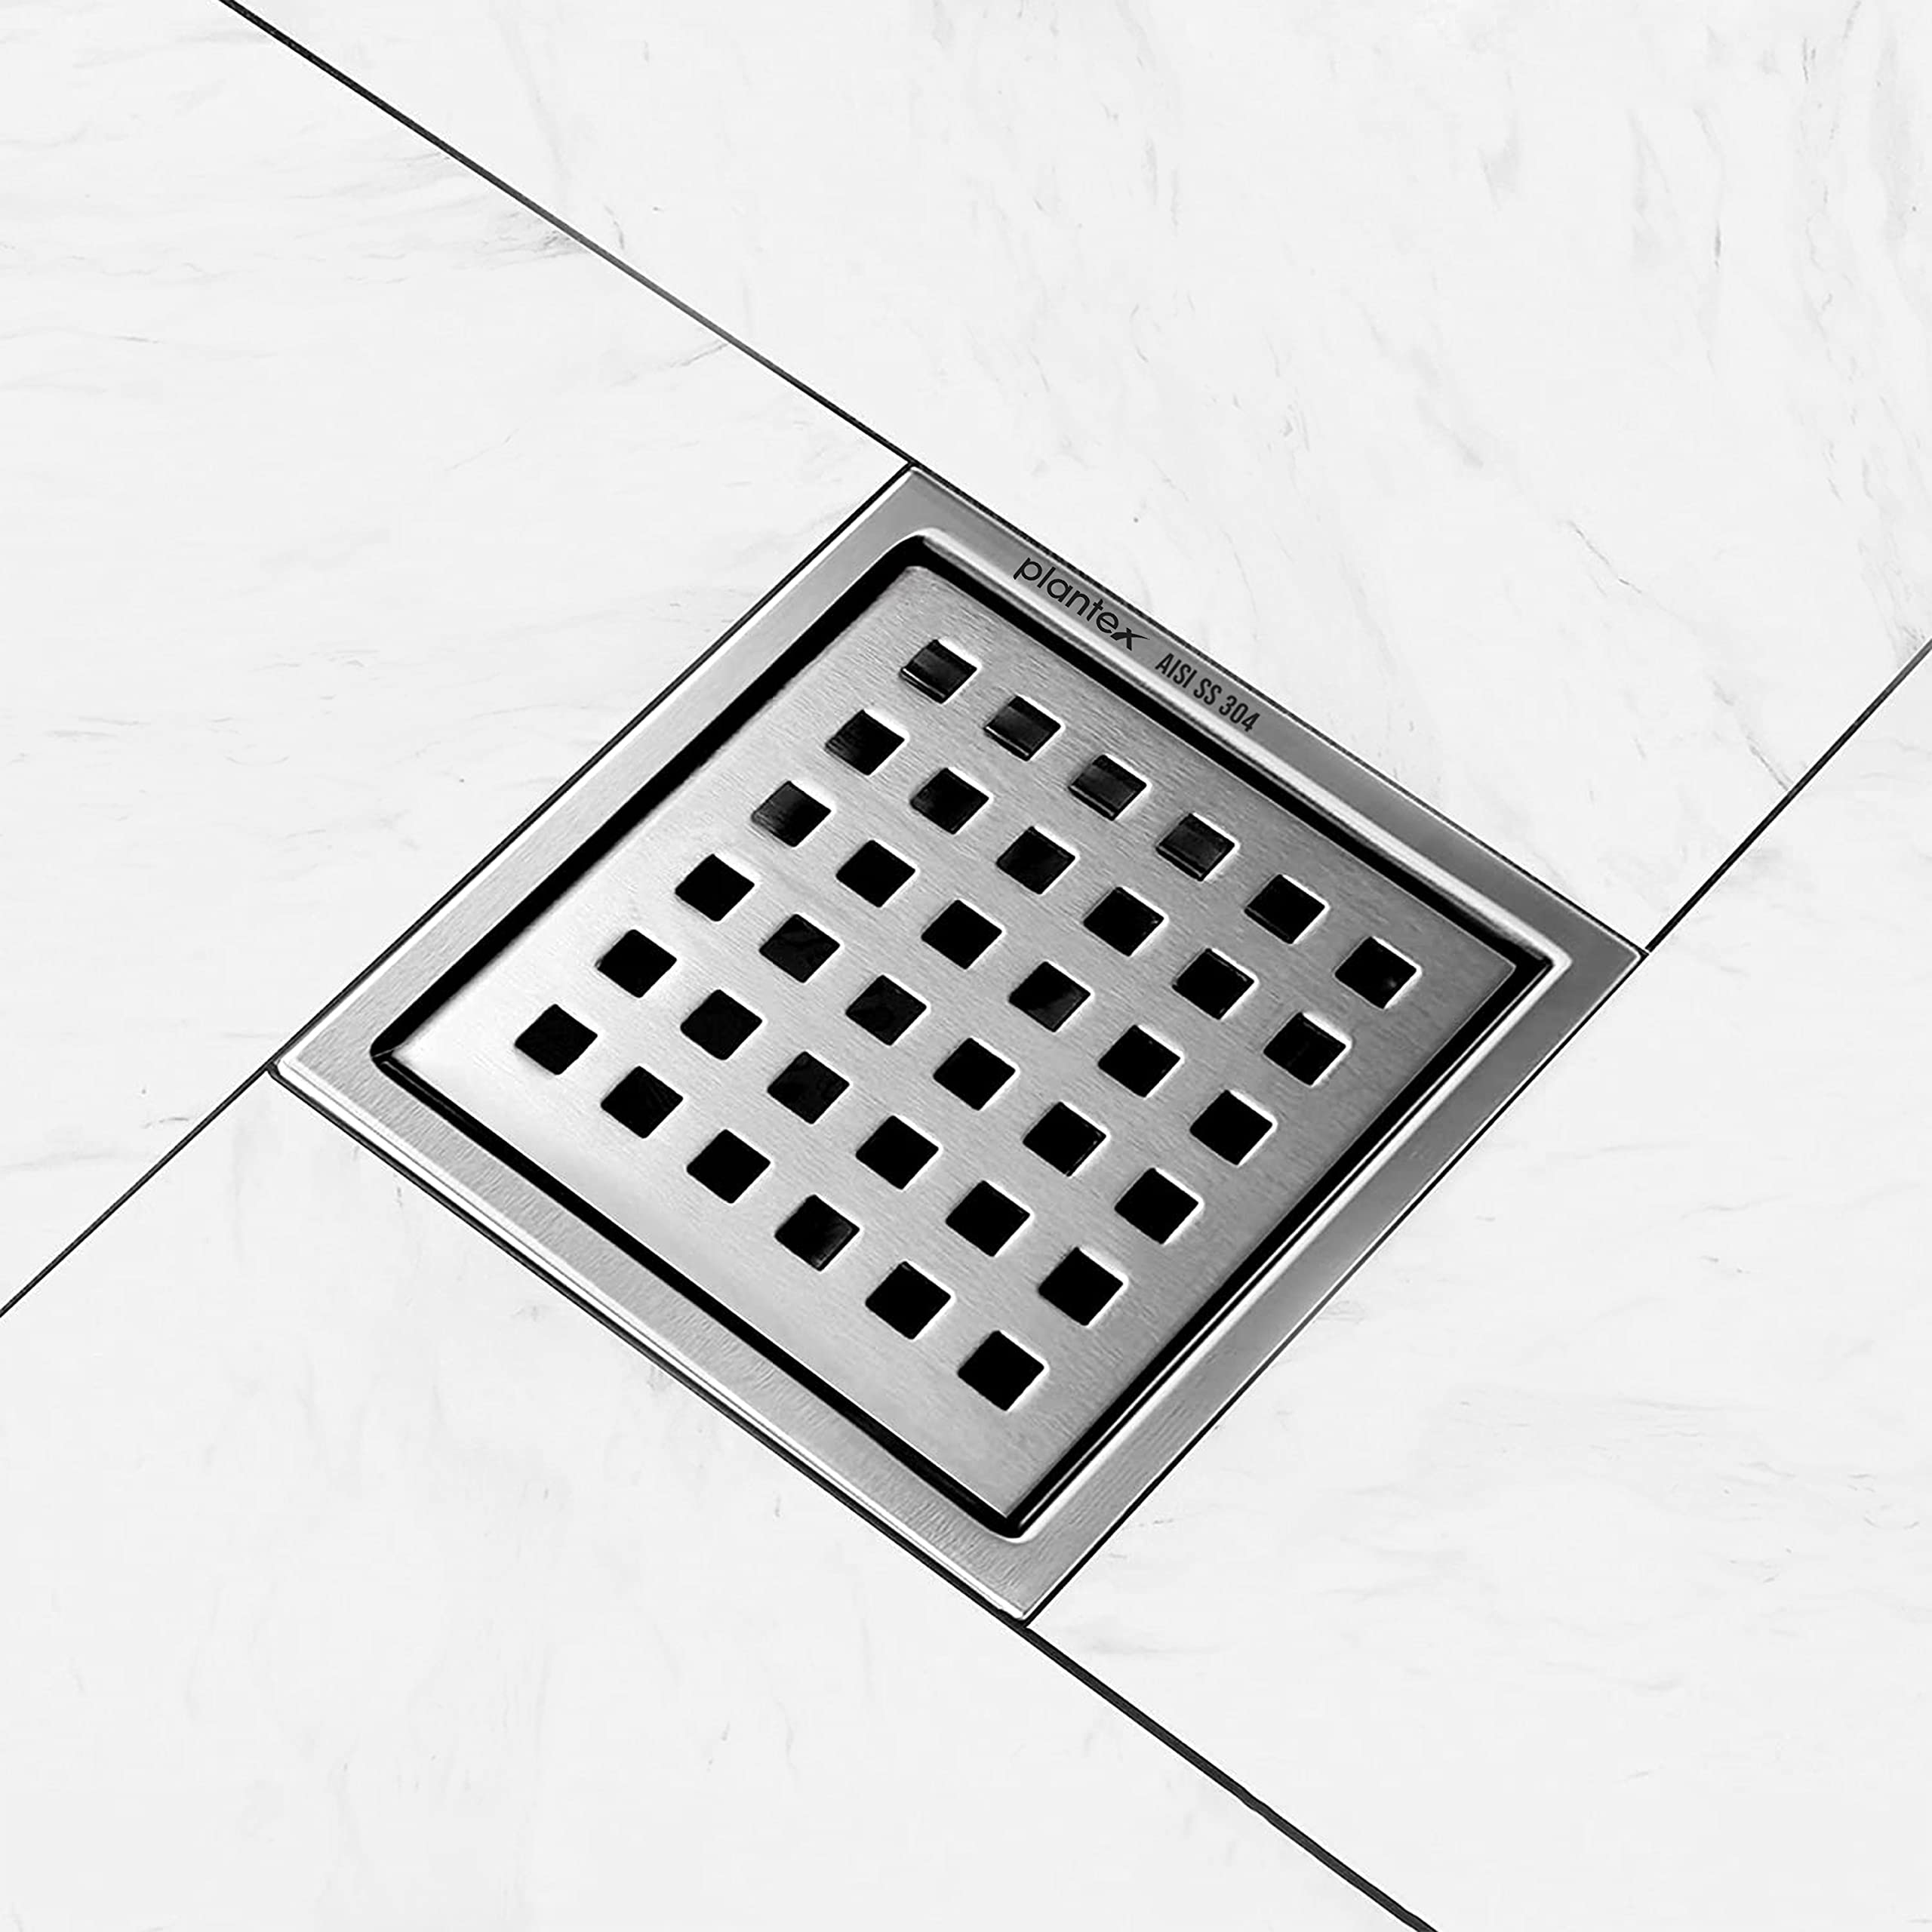 Plantex 304 Grade Stainless Steel Jali/Shower Drain/Floor Trap for Bathroom and Kitchen - (6x6 inches)